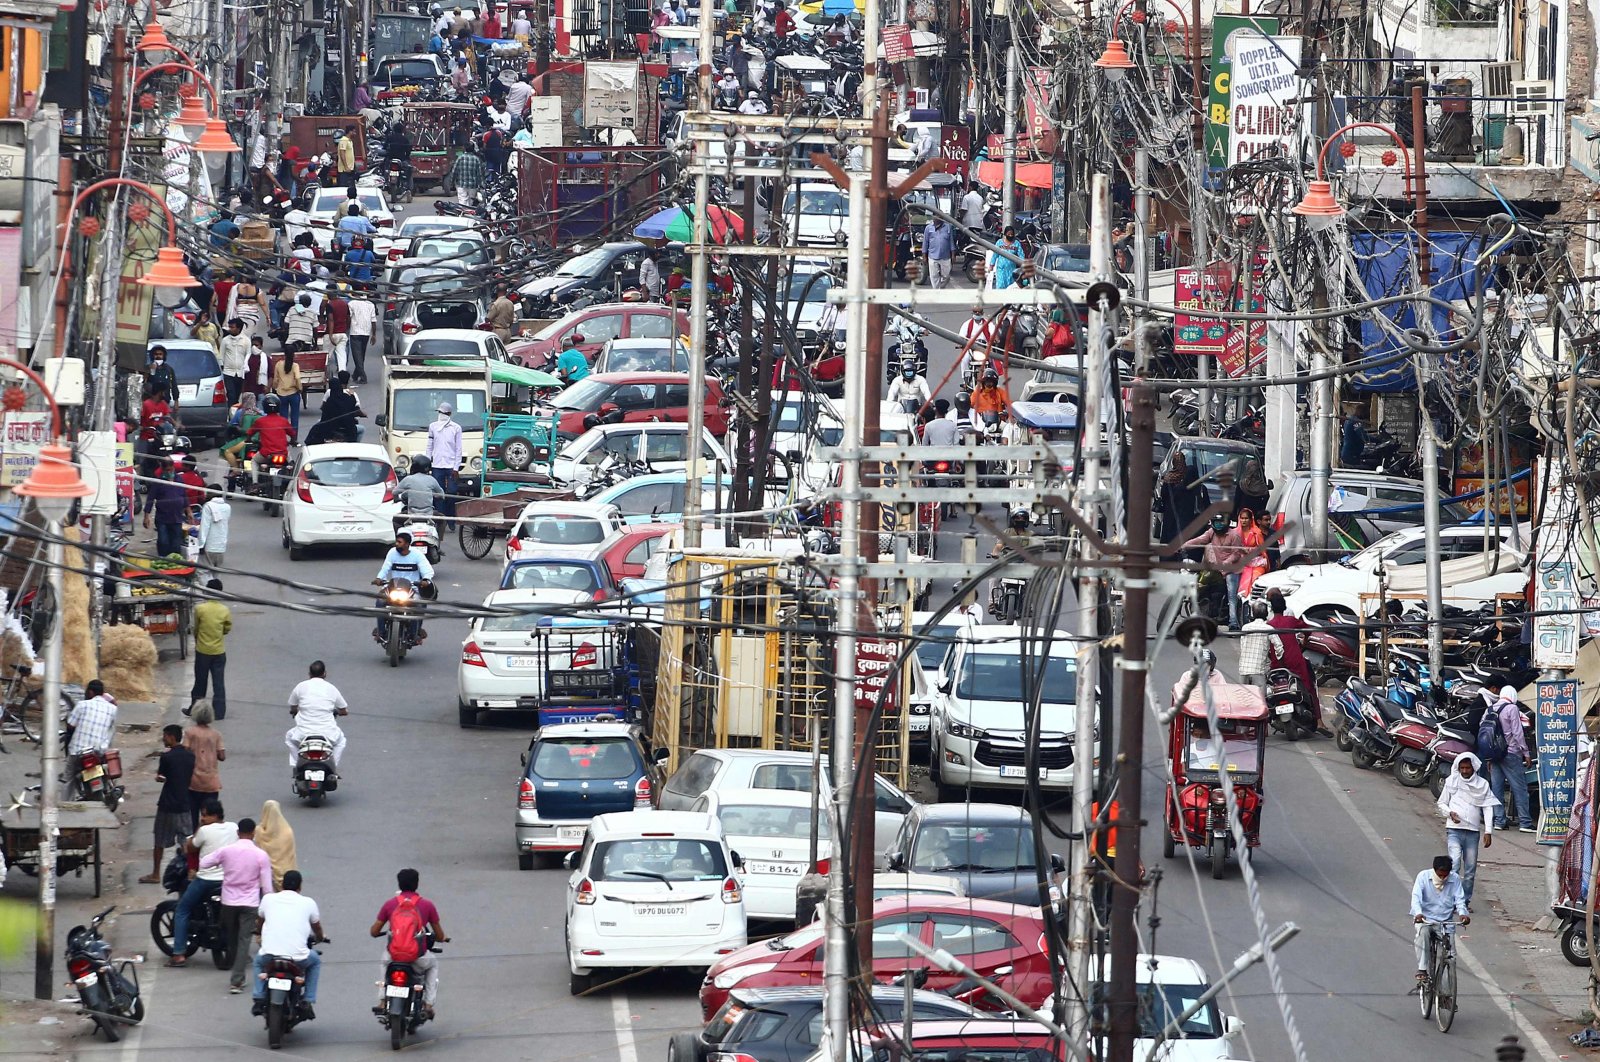 Commuters are seen along a road in the old City Chowk area after the government eased restrictions imposed as a preventive measure against the COVID-19 coronavirus, Allahabad, June 1, 2020. (AFP Photo)